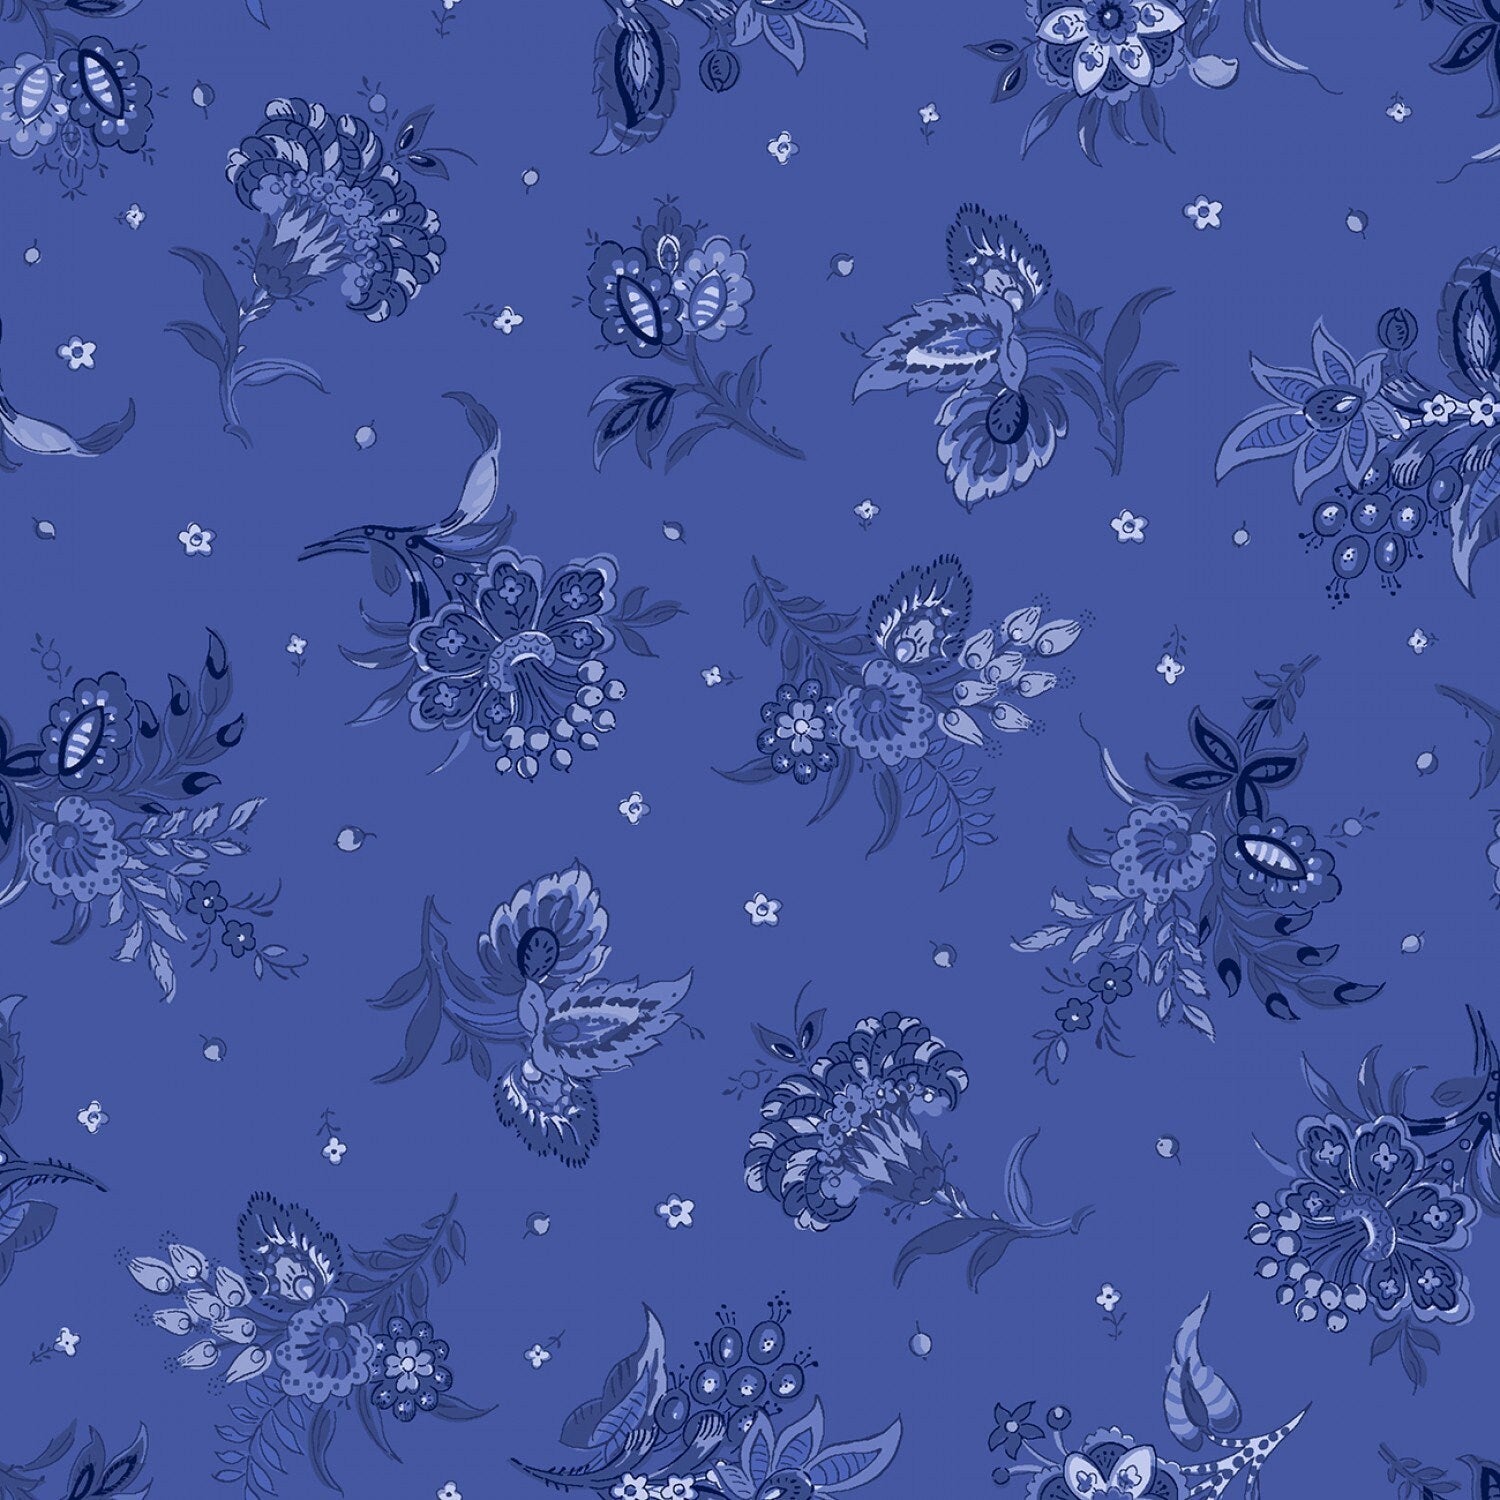 French Quarter 10" Squares, Maywood Studio SQ-MASFREQ, Blue Cream French Country Floral Fabric, 10" Inch Fabric Squares